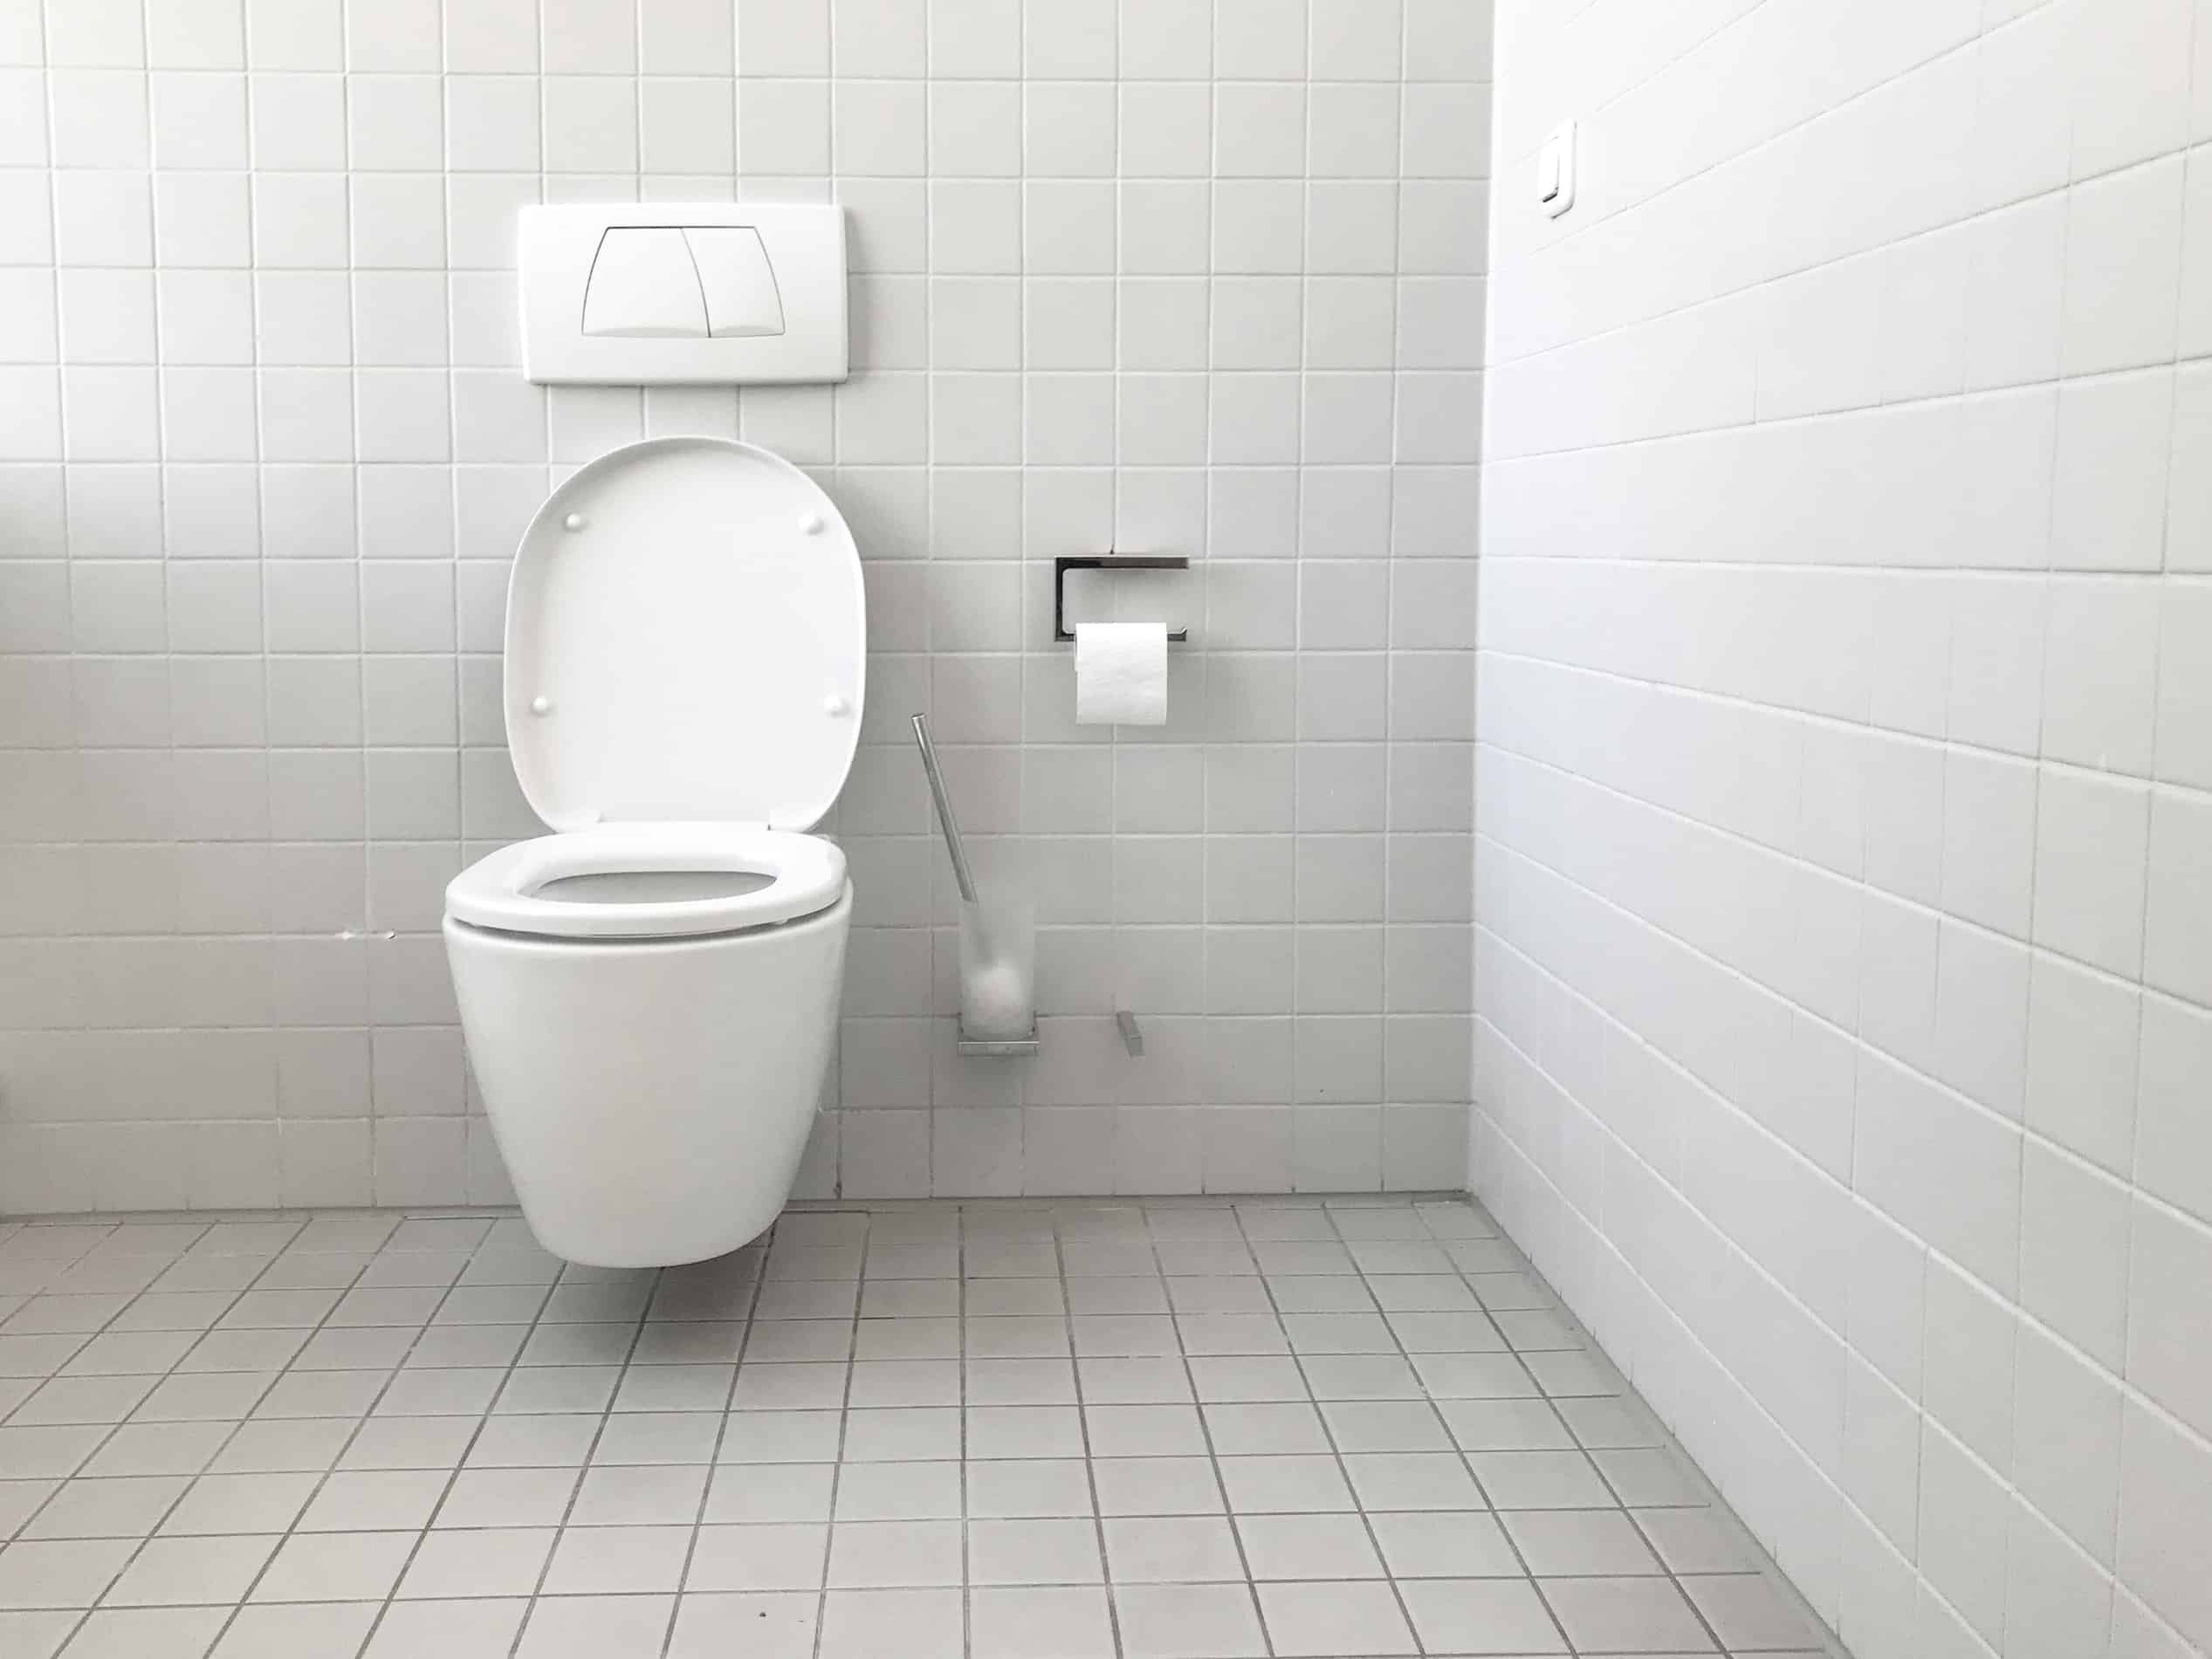 7 Ways for Unblocking a Toilet Without a Plumber